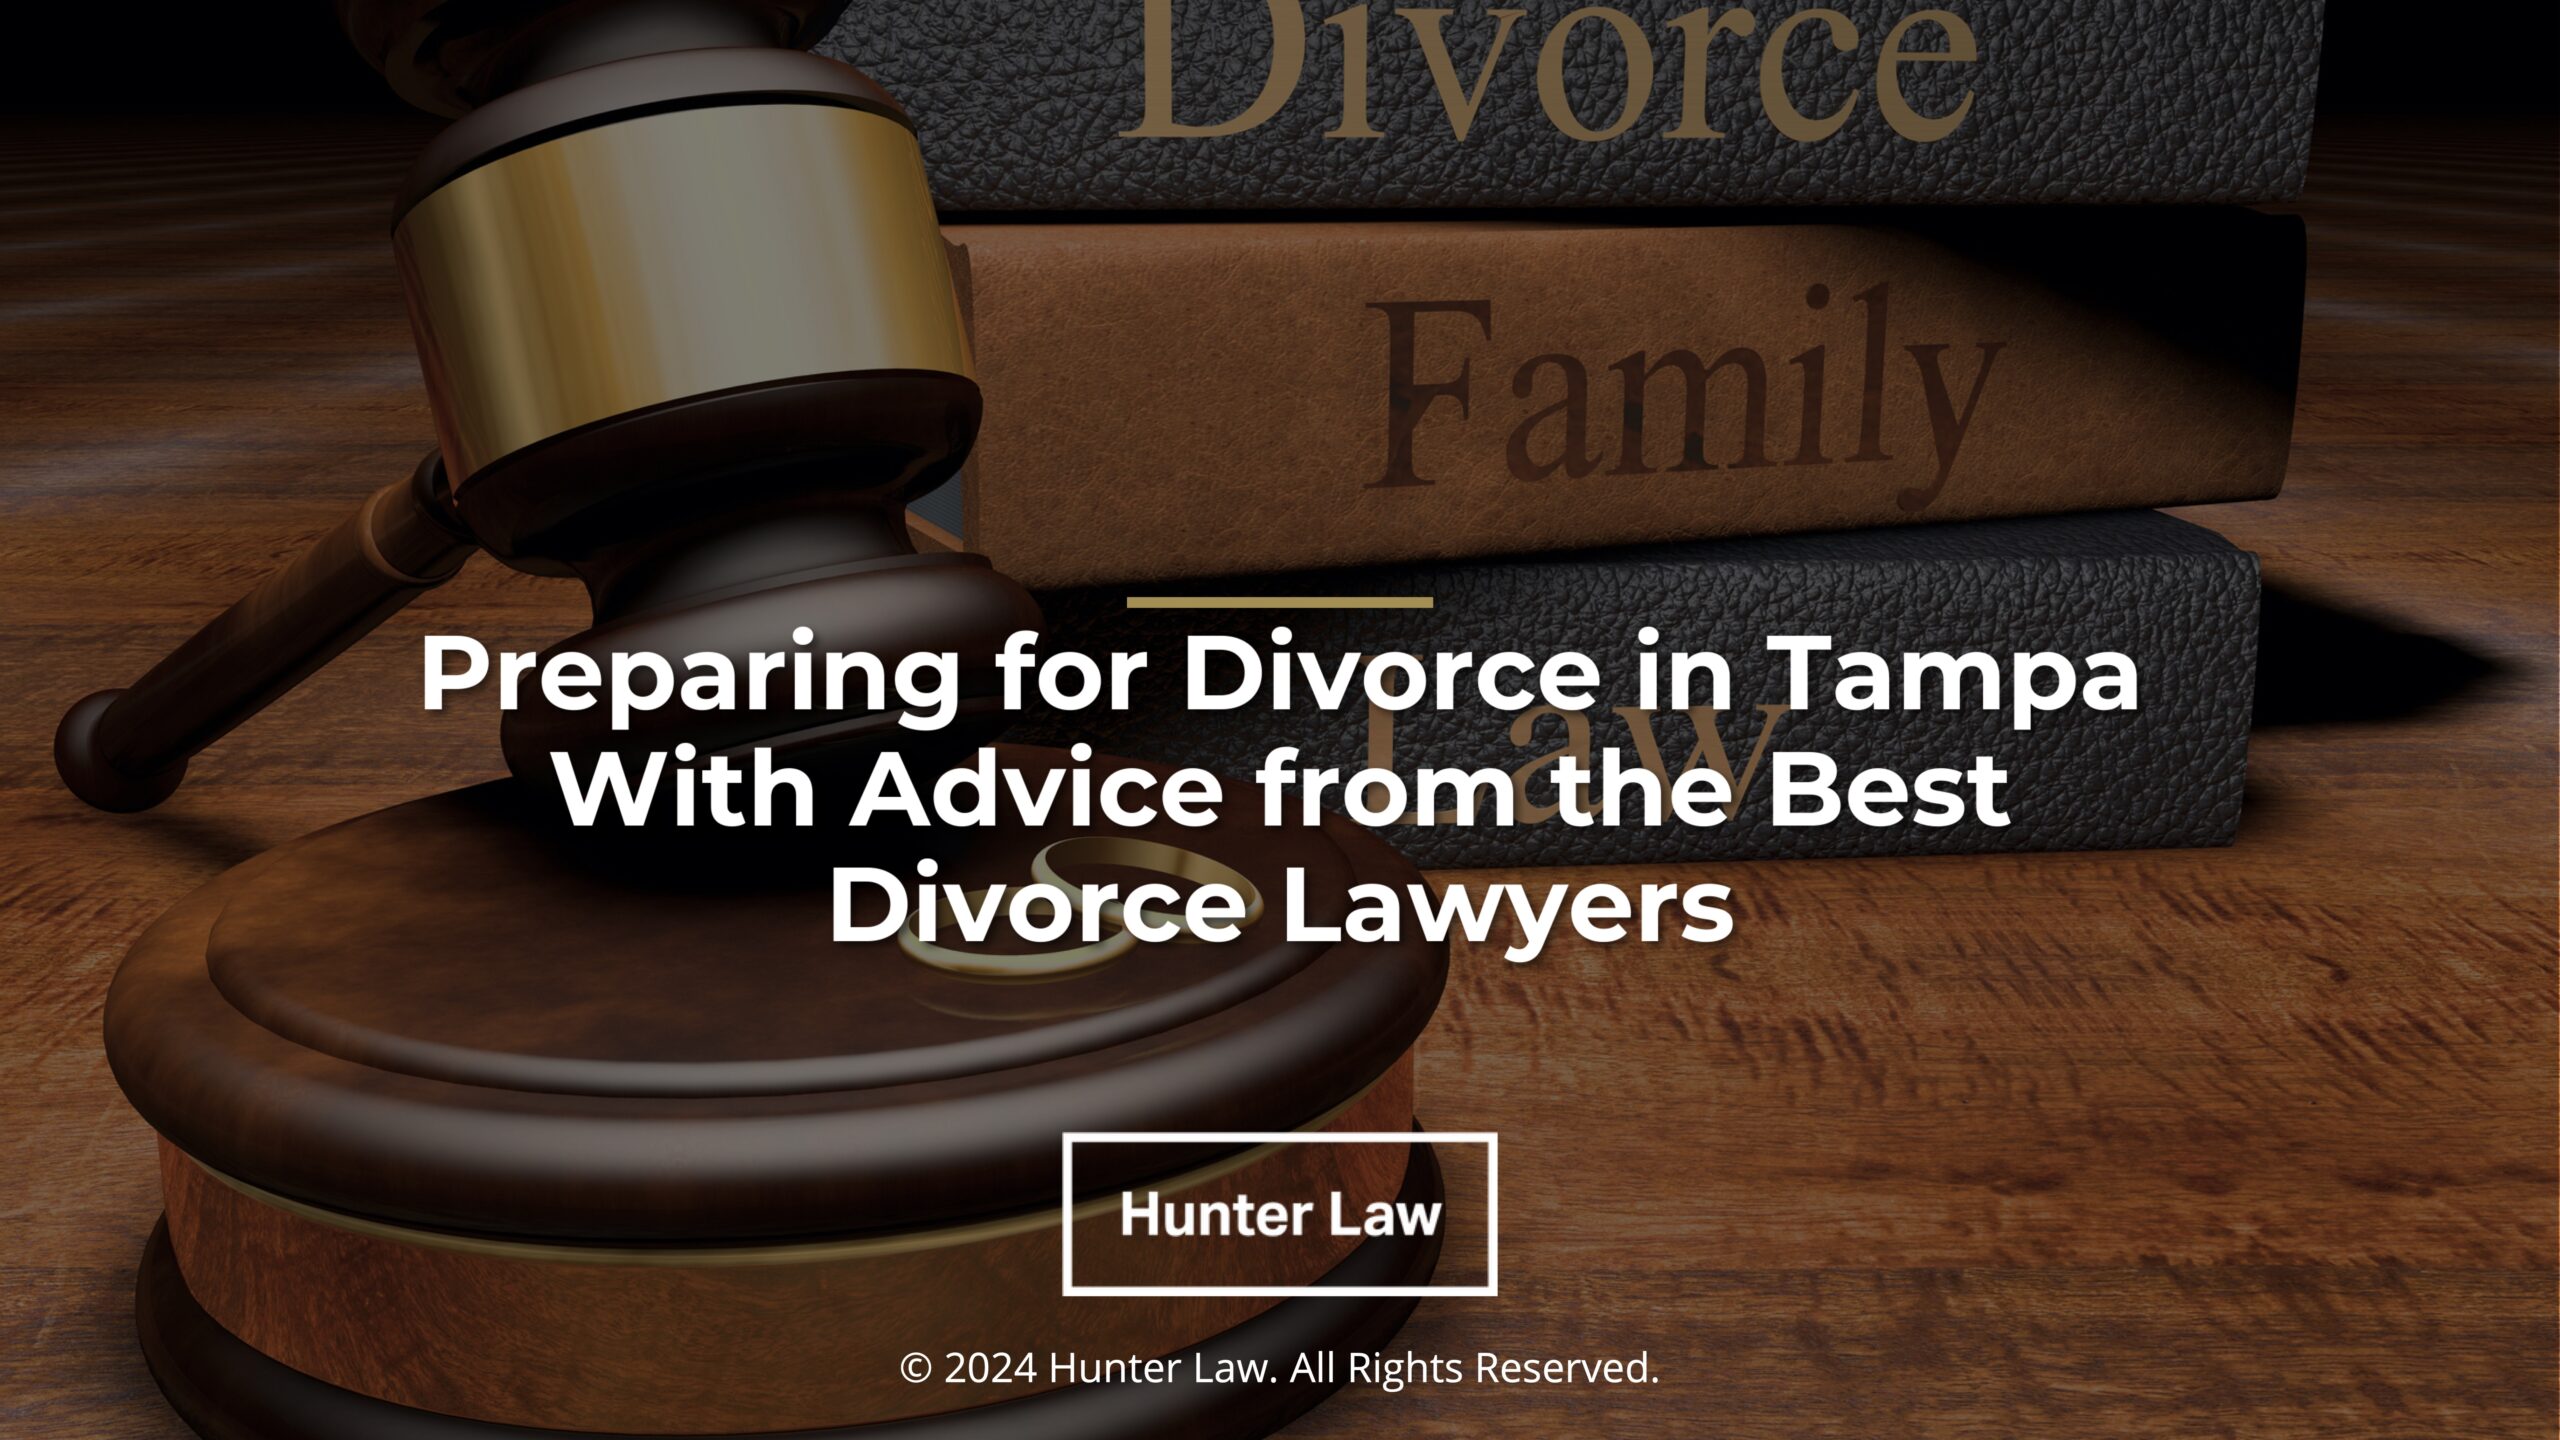 Featured: Judges gavel, divorce books, wedding rings on desk- Preparing for divorce in Tampa with advice from the best divorce lawyers